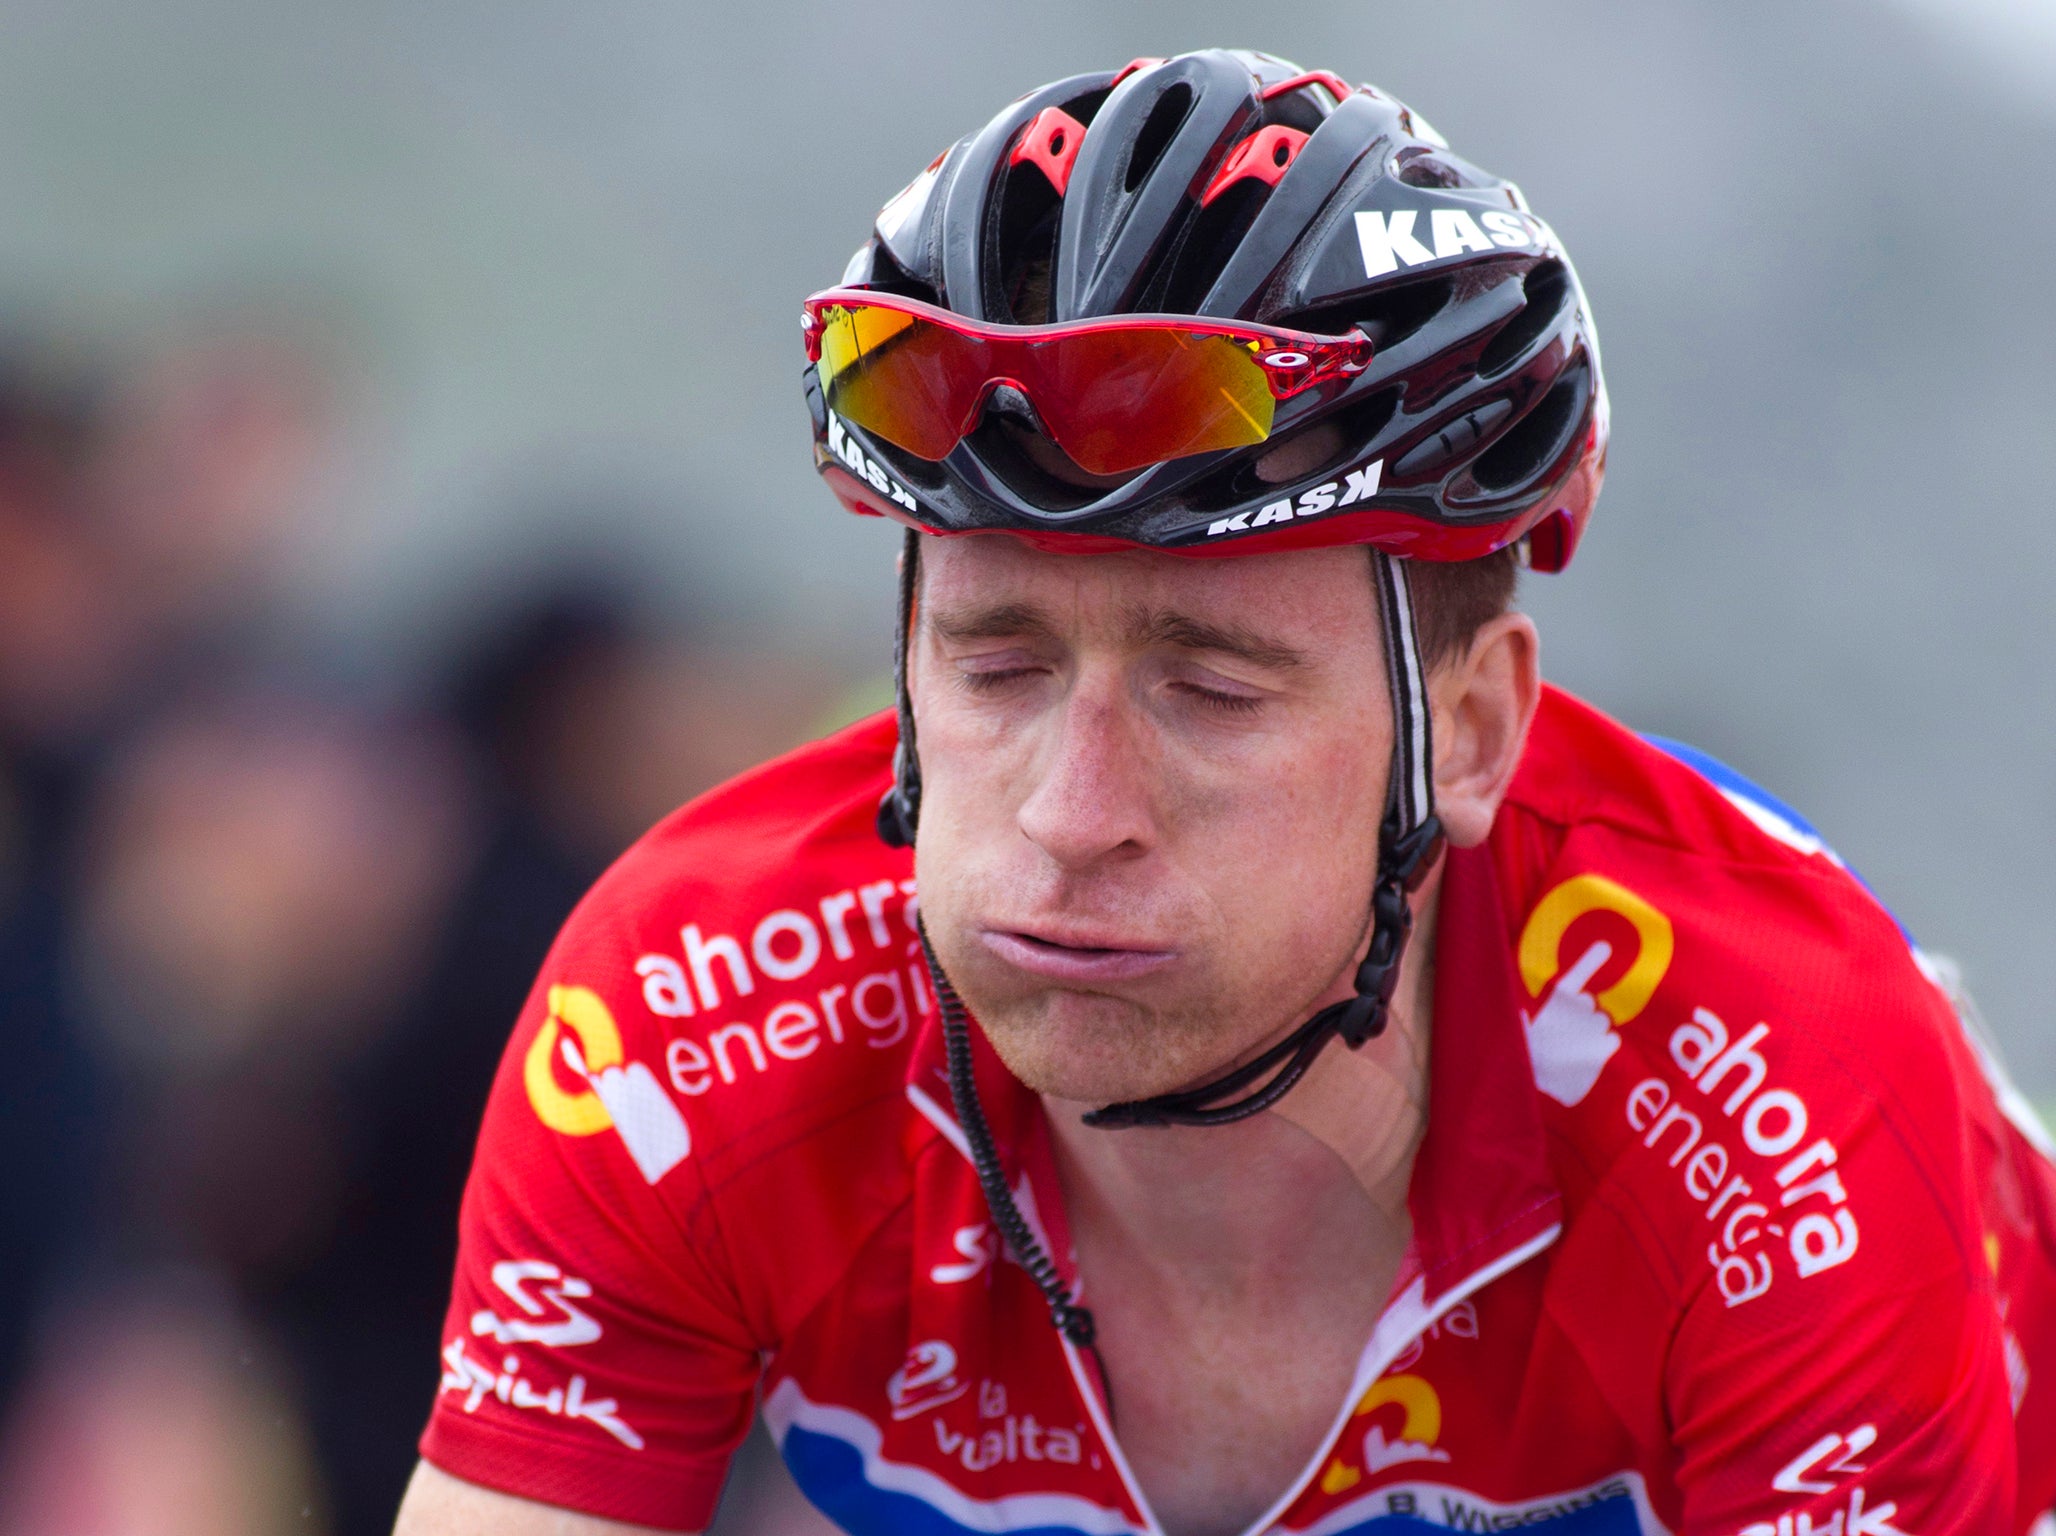 Ukad investigated a package sent to Bradley Wiggins in 2011